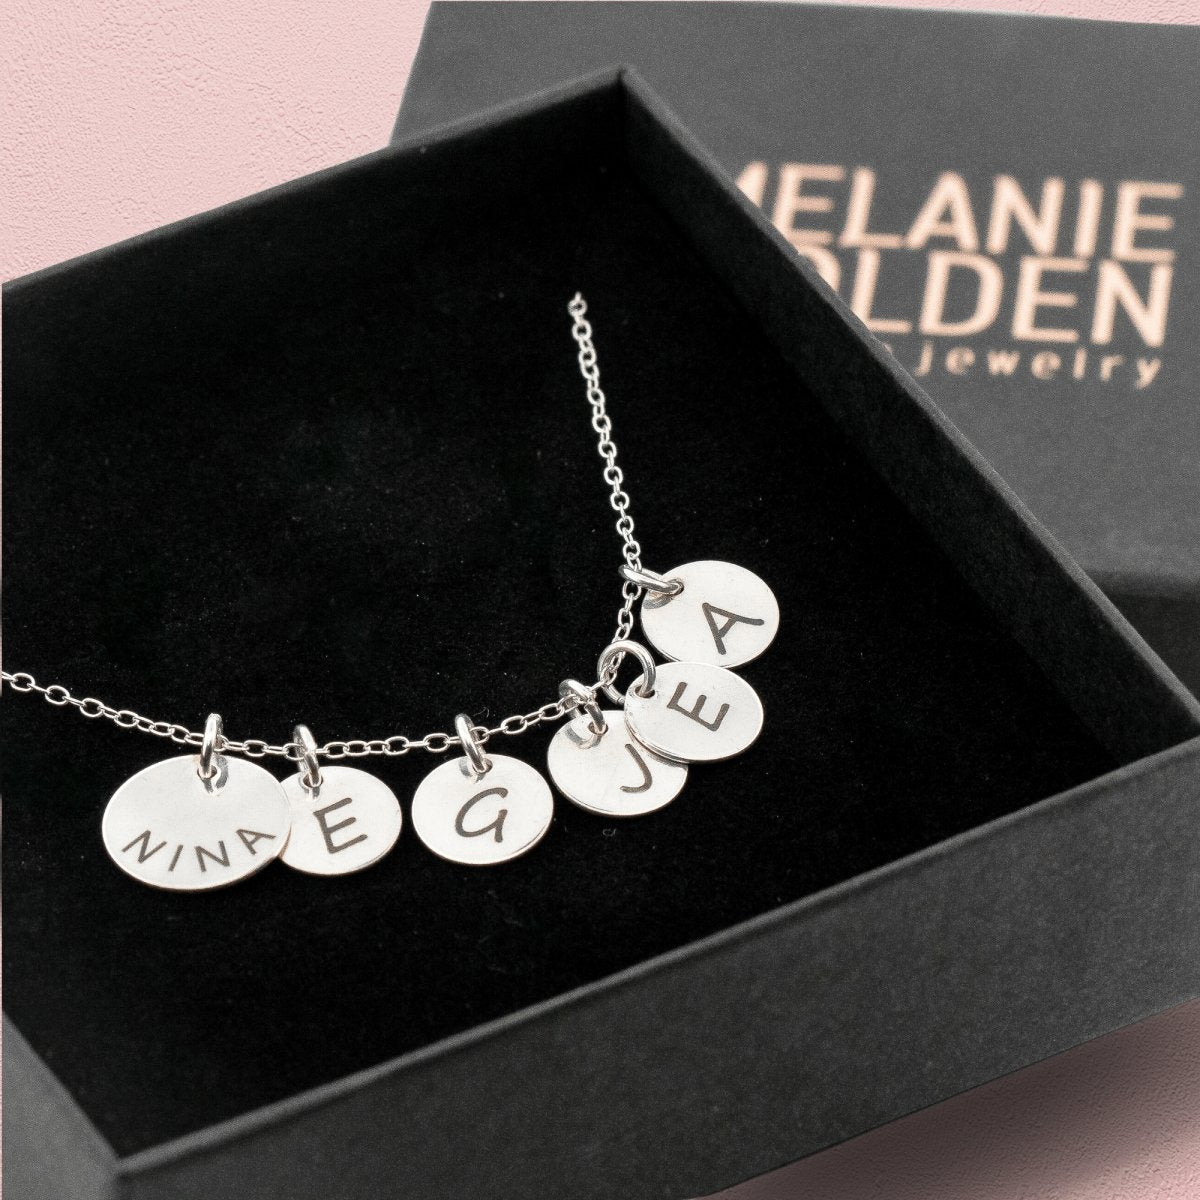 Custom Grandmother Disc Necklace - Melanie Golden Jewelry - custom, disc necklaces, Engraved Jewelry, love, motherhood, necklace, necklaces, personalized, personalized necklace